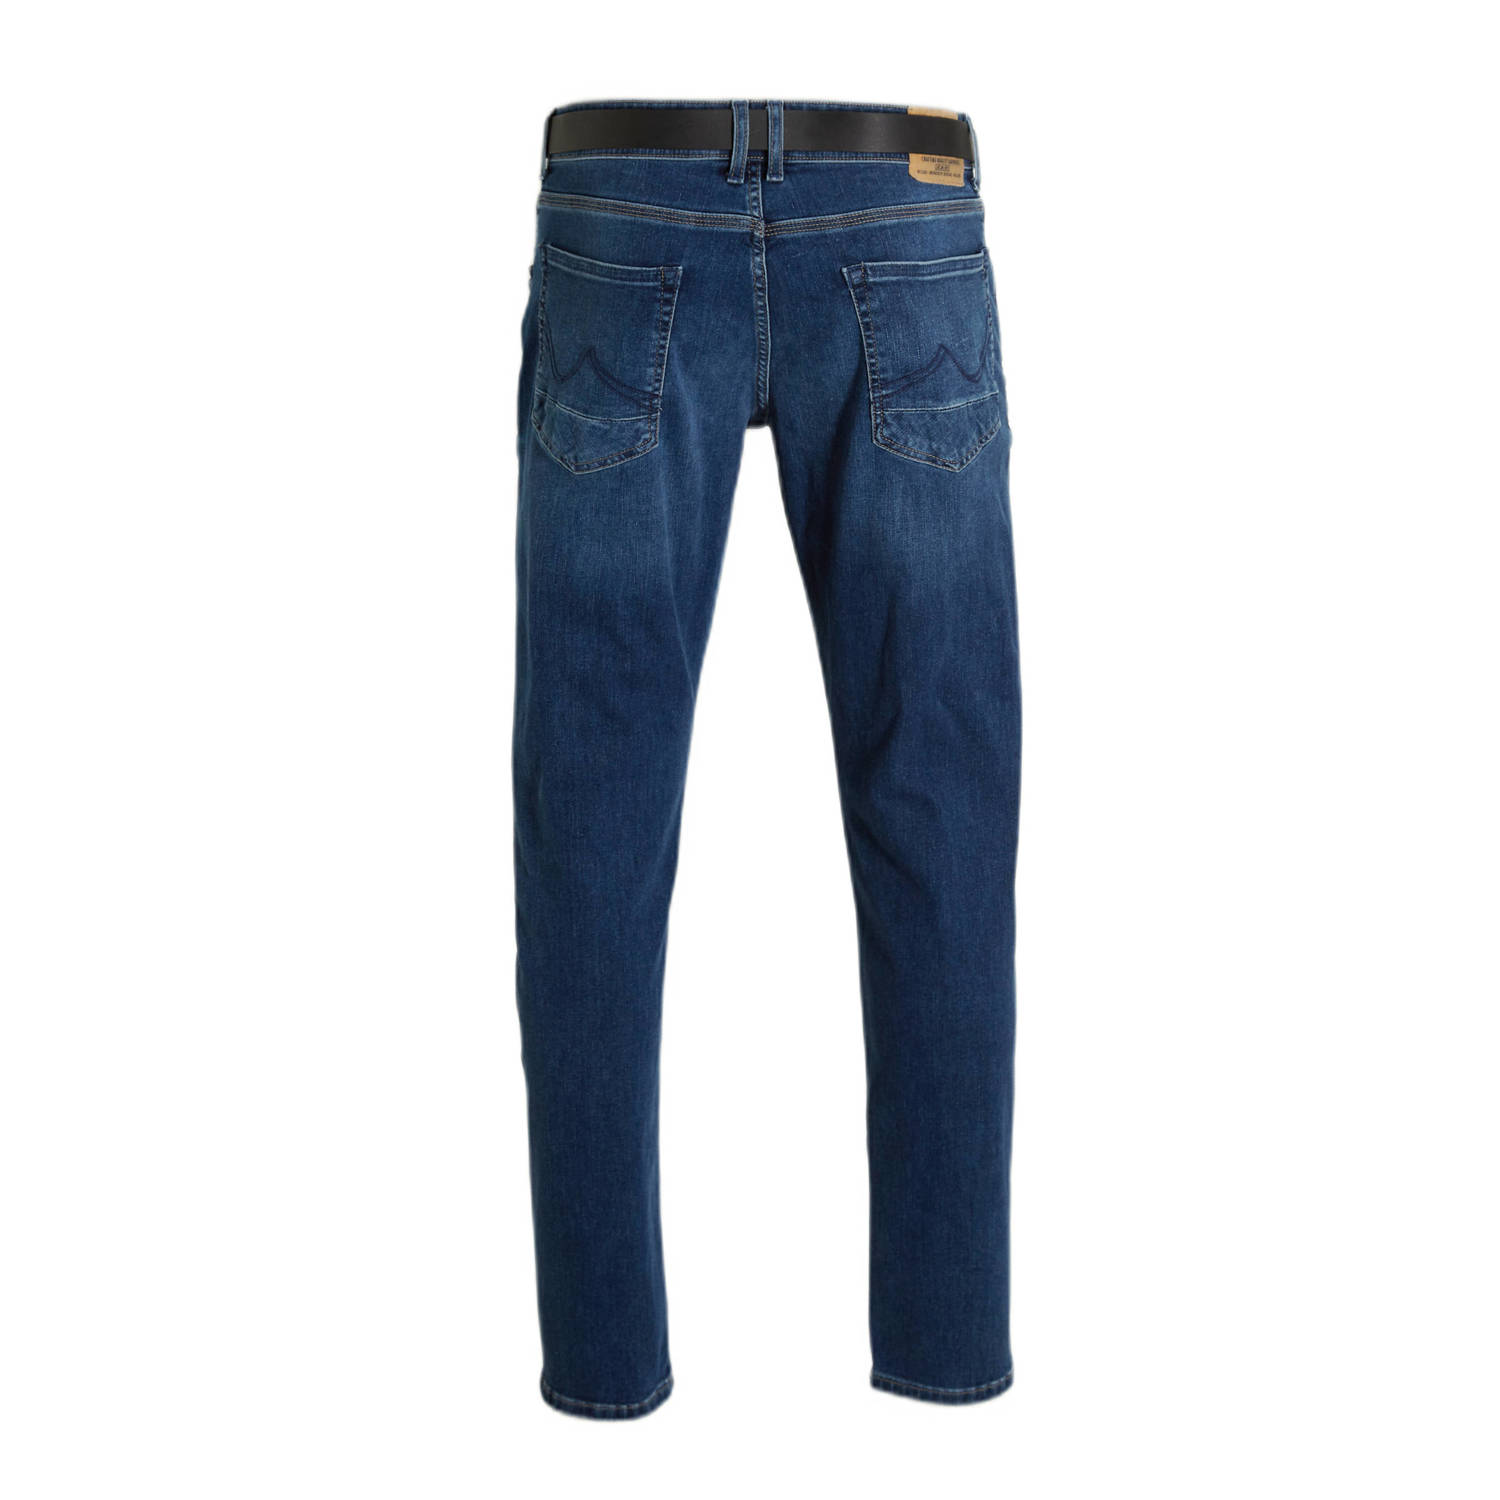 Petrol Industries tapered fit jeans RUSSEL-CLASSIC medium stone